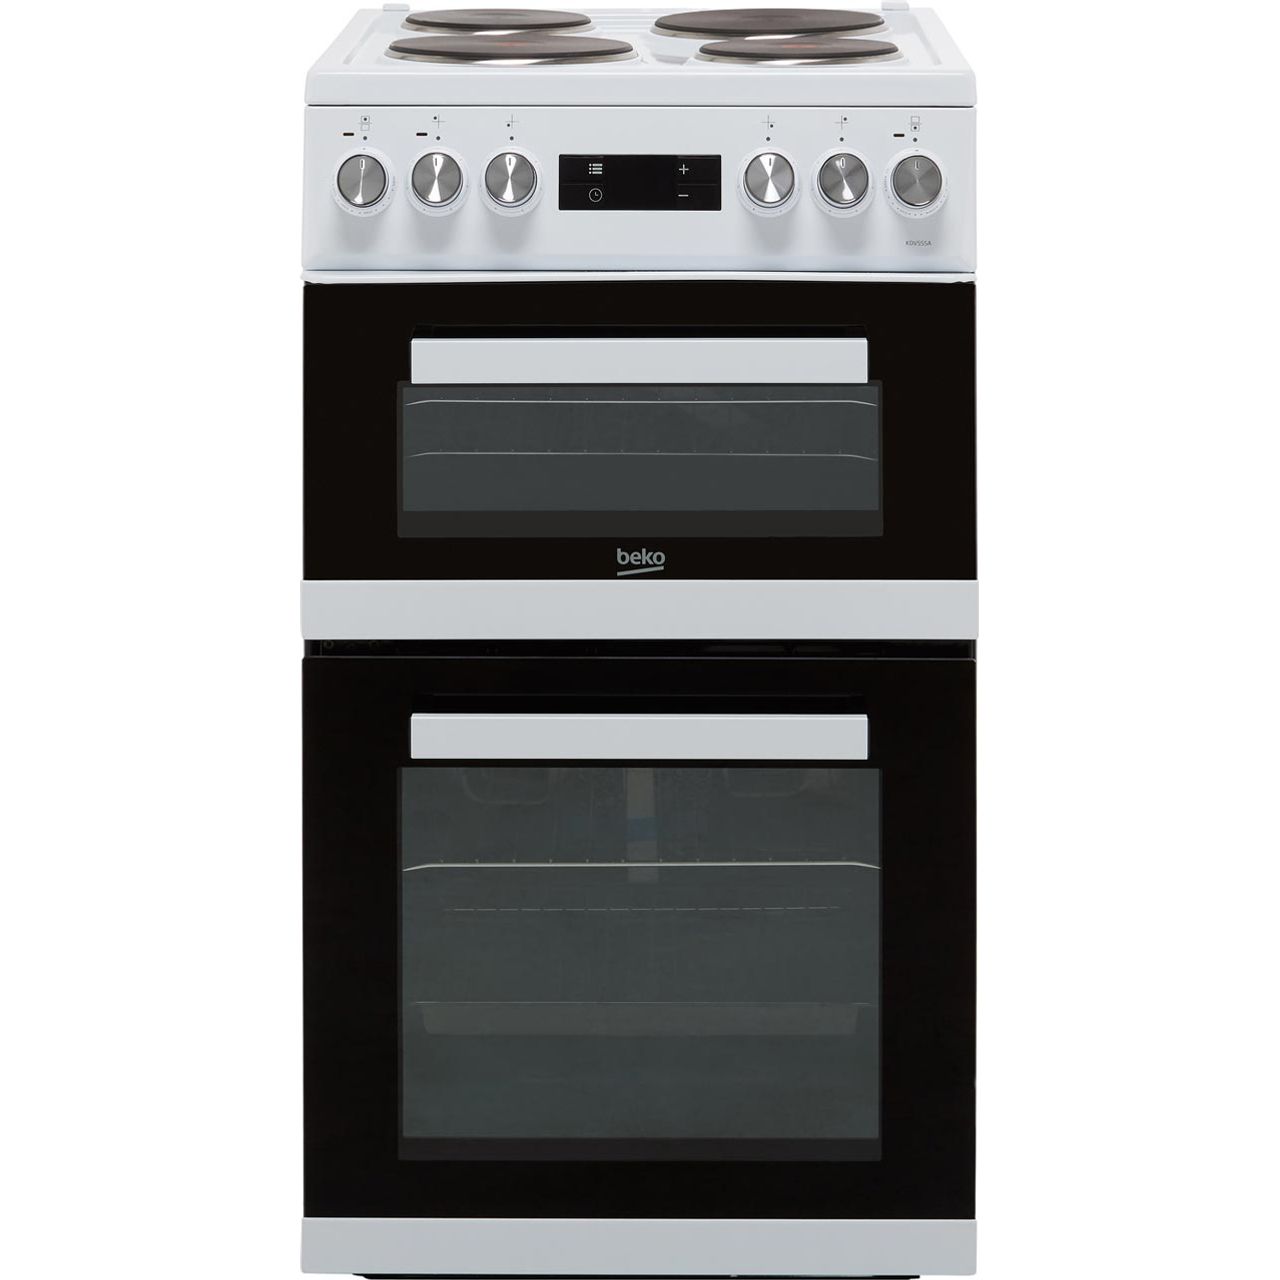 Beko KDV555AW 50cm Electric Cooker with Solid Plate Hob Review